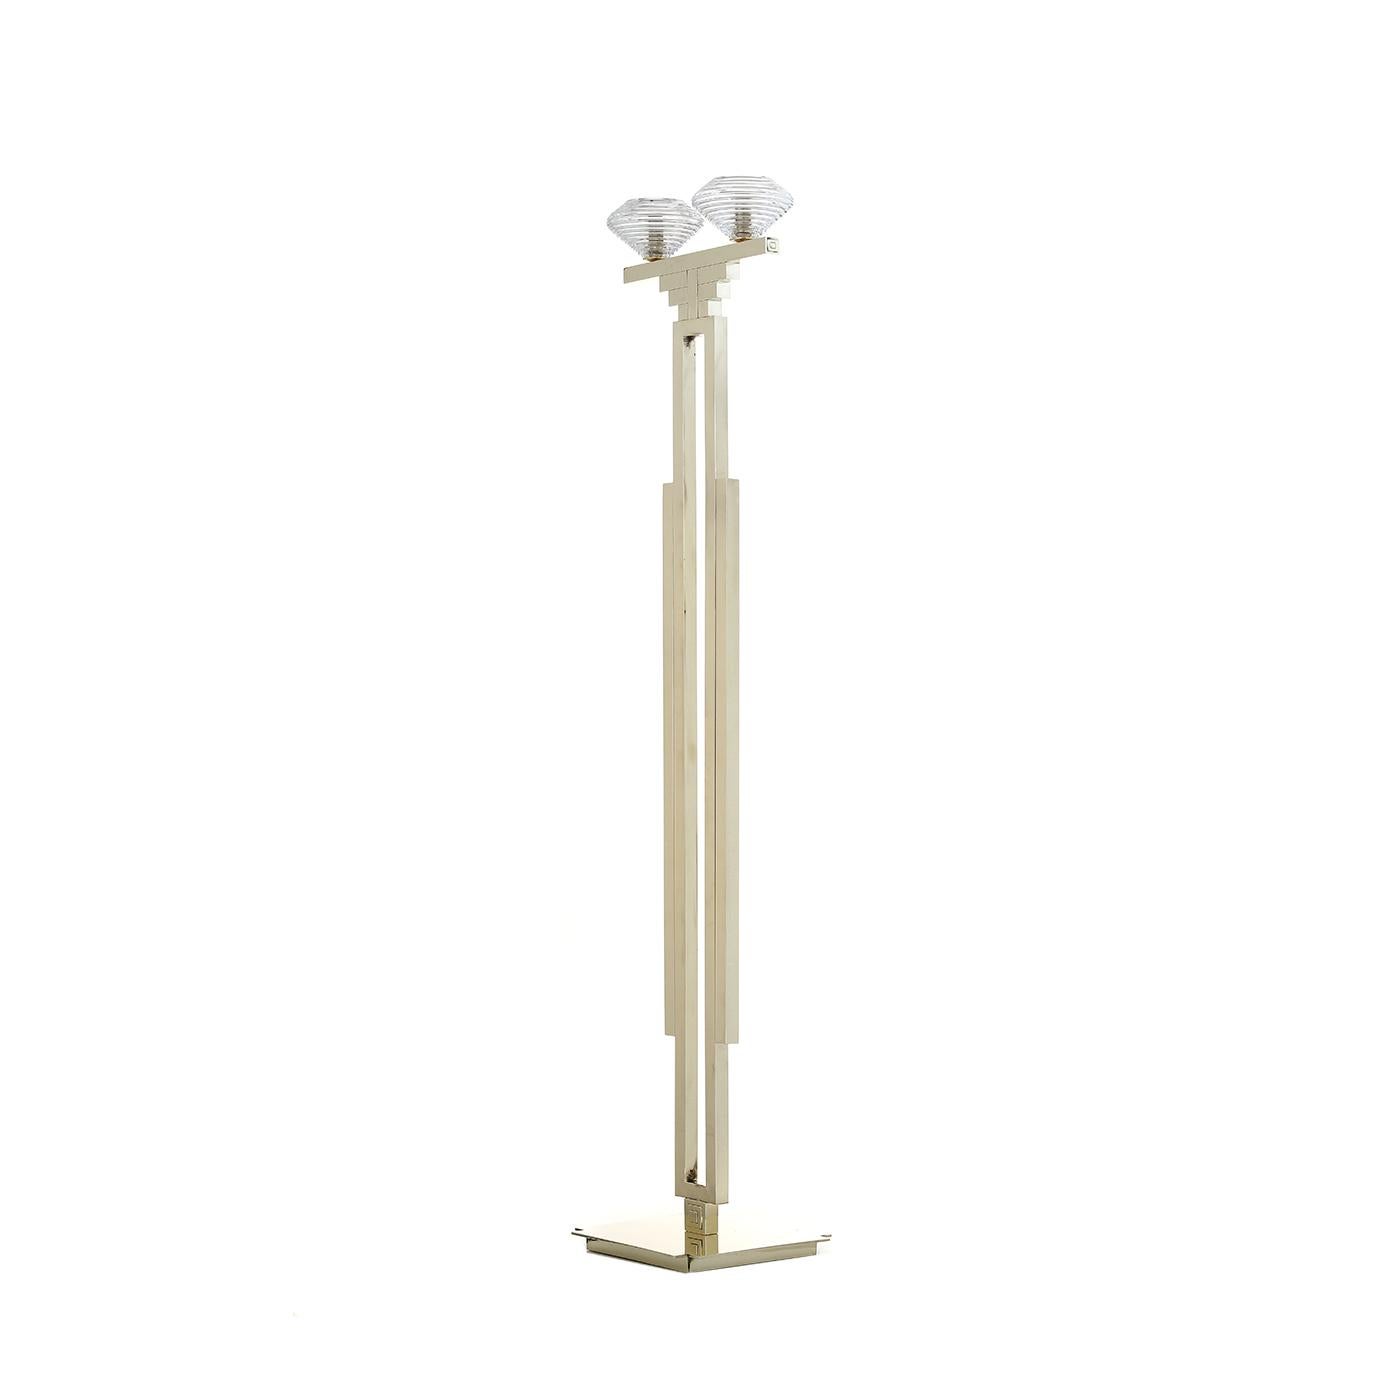 Inspired by the bold and stylish art deco designs, this elegant floor lamp will enrich any room in the house with its timeless allure and minimalist silhouette. The metal structure is welded and brushed by skilled craftsmen in a series of pure